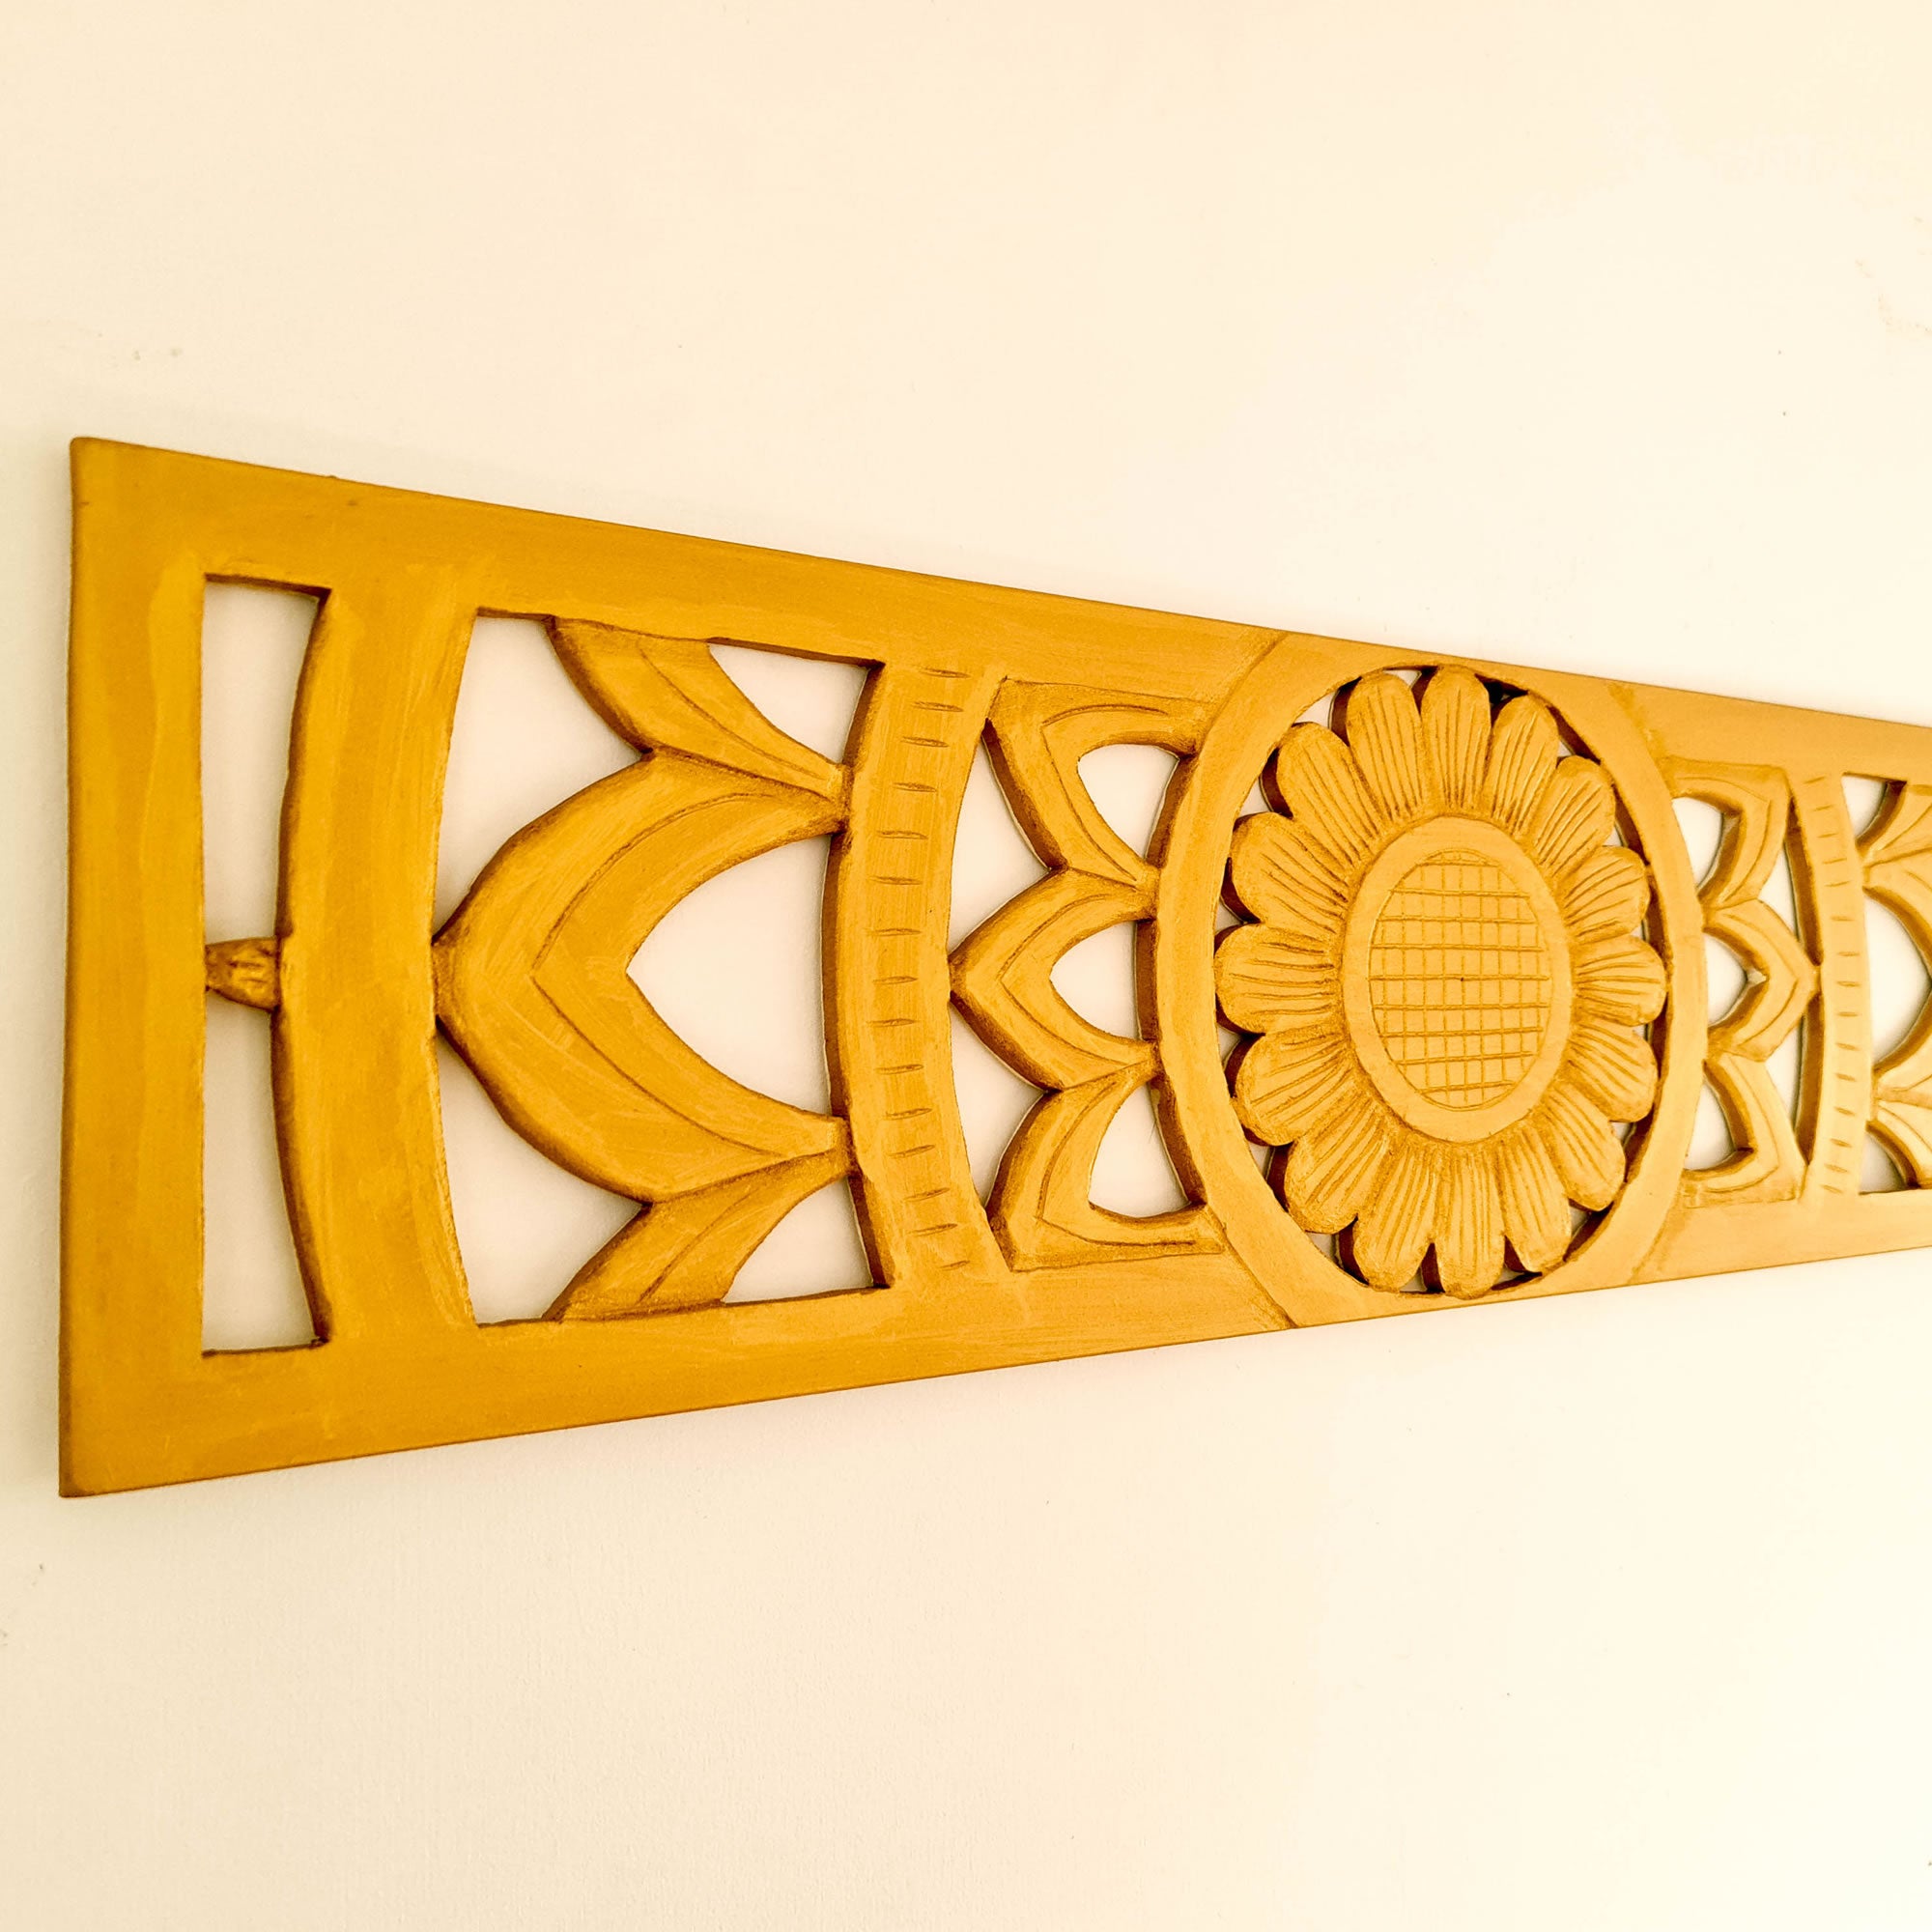 Carved Wooden Decorative Long Panel Art Sculpture Gold Mandala Headboard. Hand crafted by skilled craftsmen this piece is unique and simply amazing